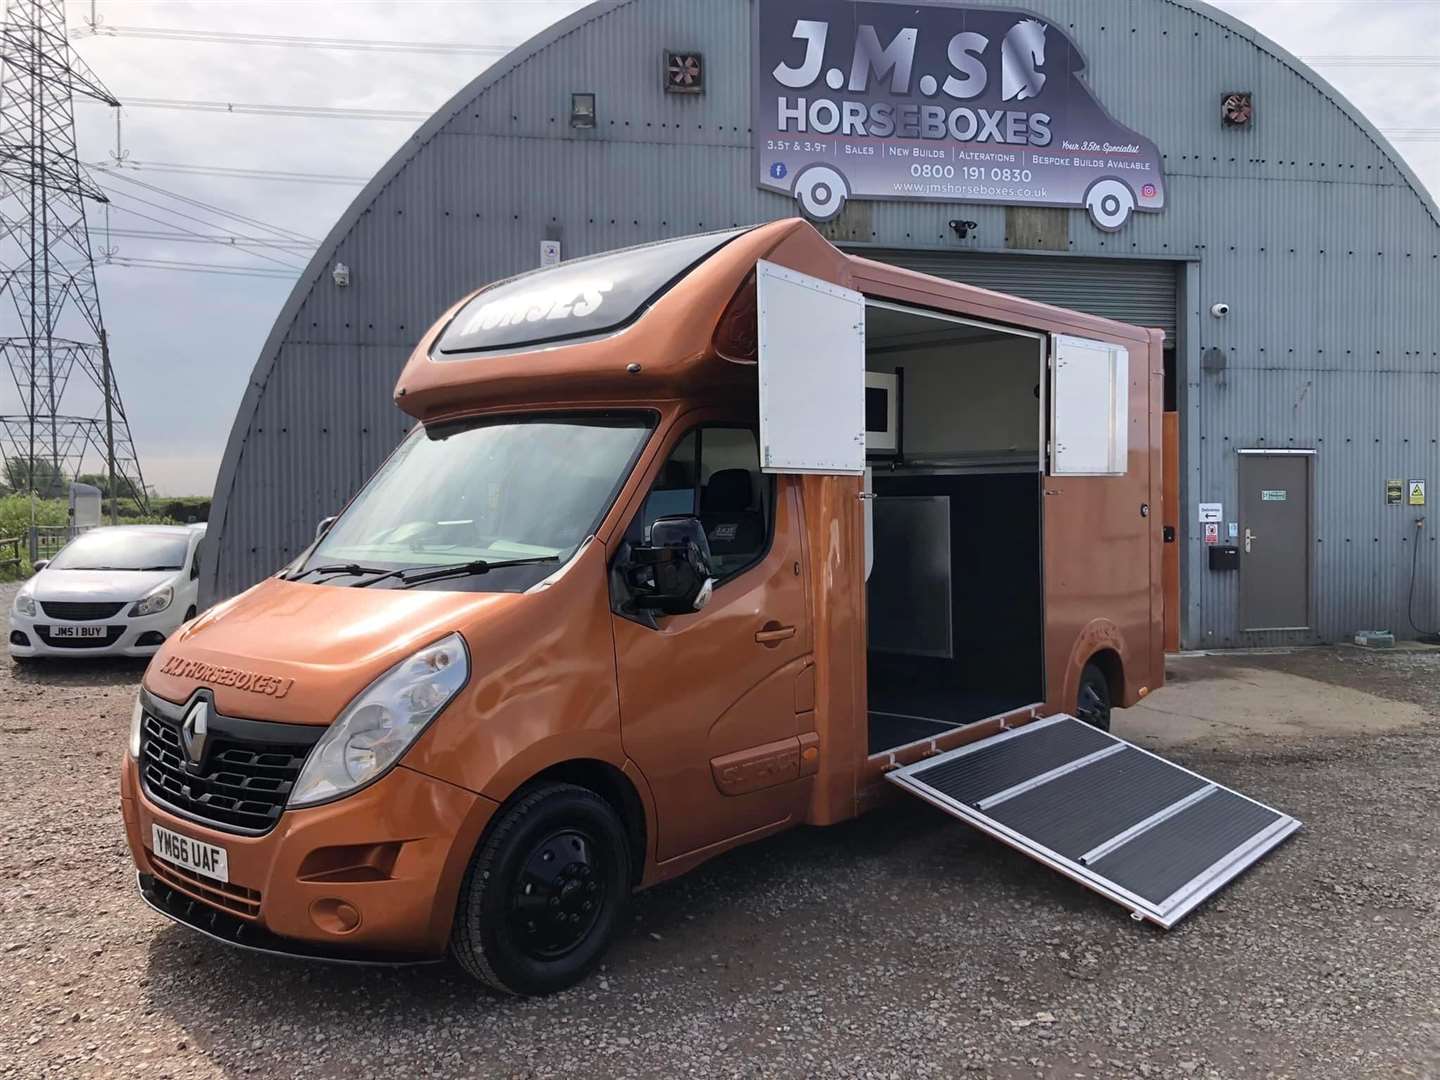 Horseboxes are sold for up to £33,000